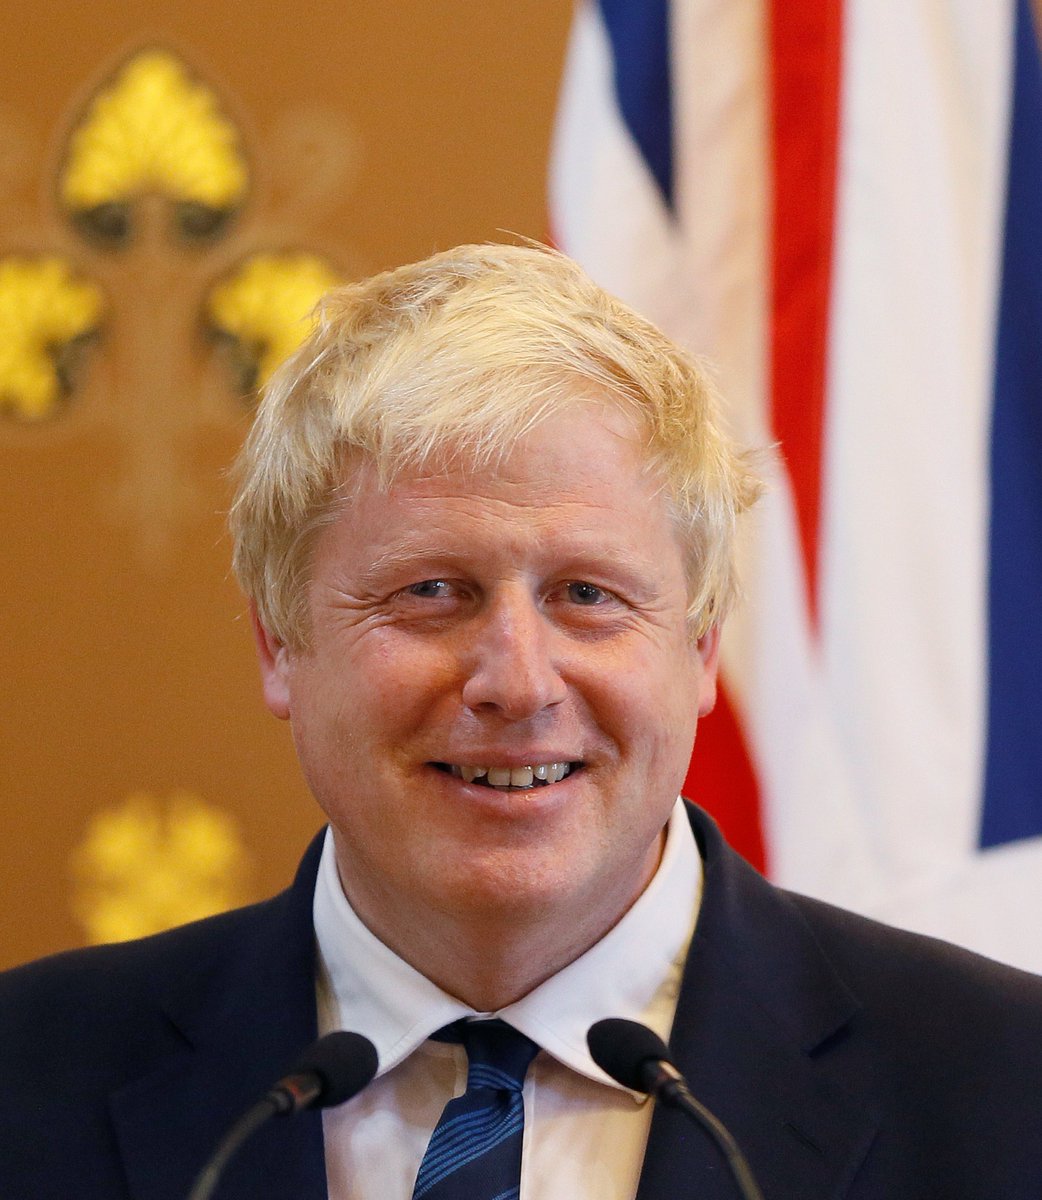 Sometimes I find the resemblance between my little Bo and British Prime Minister Boris Johnson uncanny.It's BoJo and BoJo, a thread :